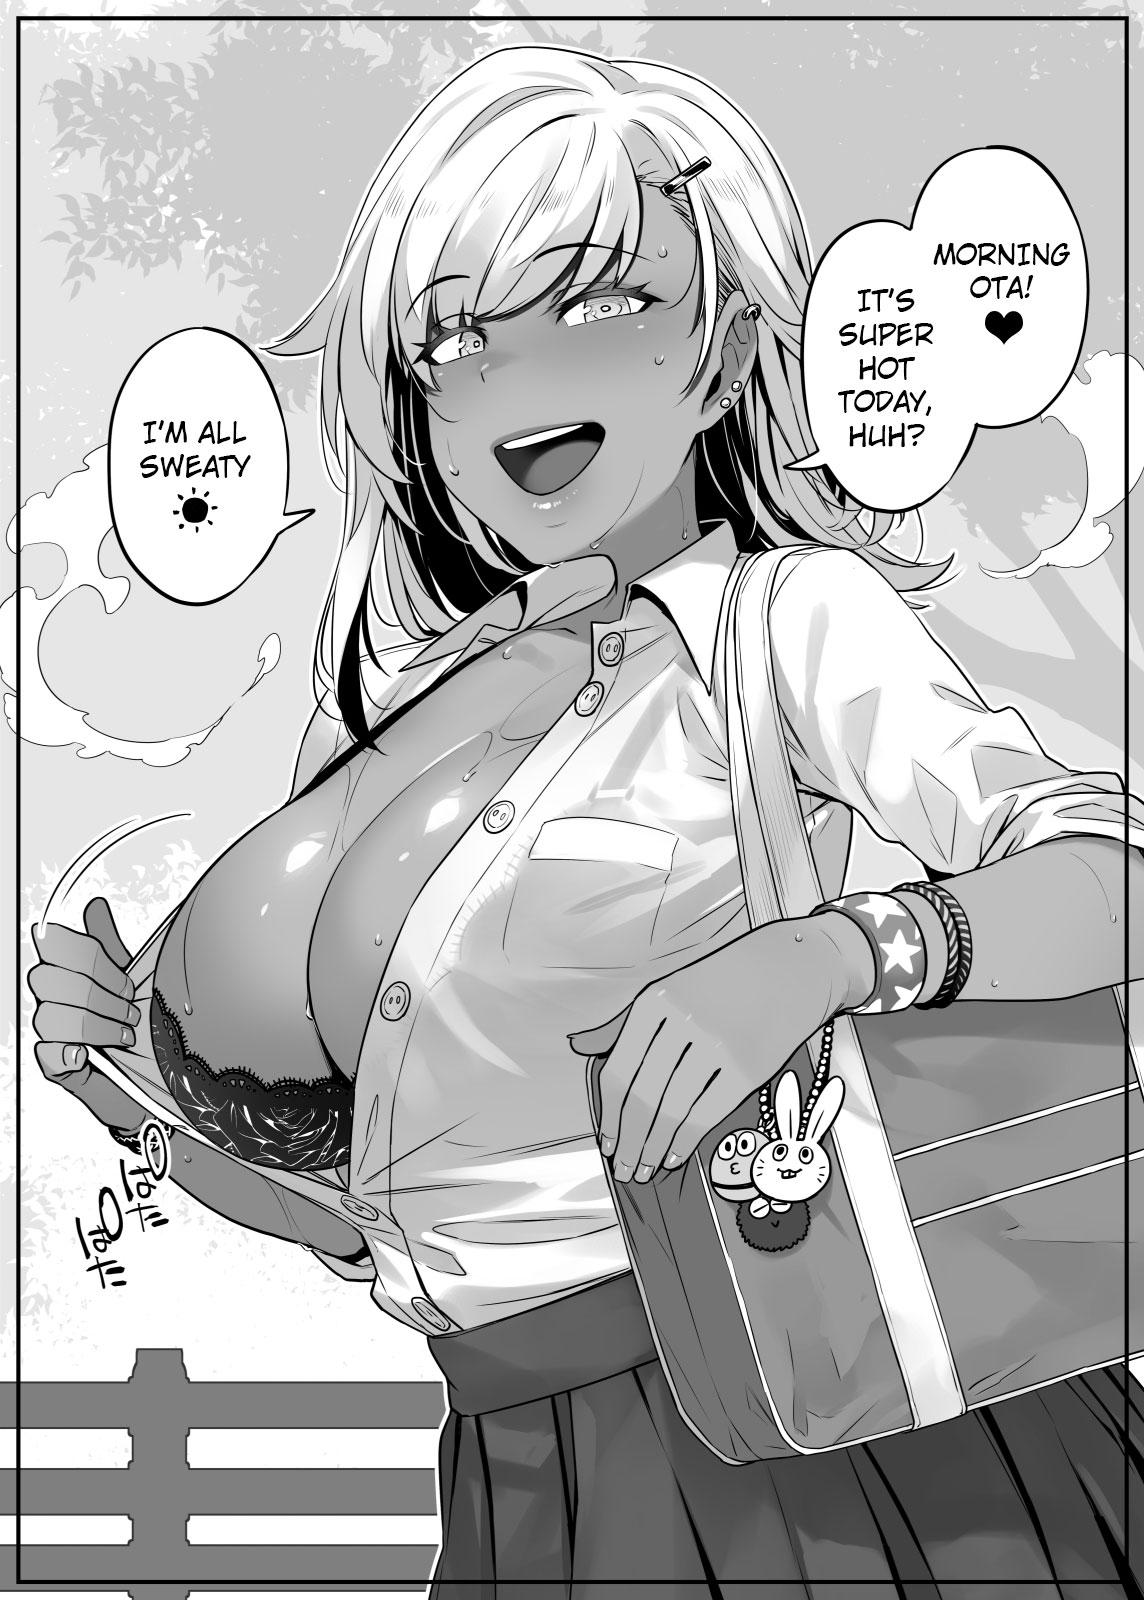 Secretary The story of a brown gal who loves otaku-kun - Original Young Tits - Page 1